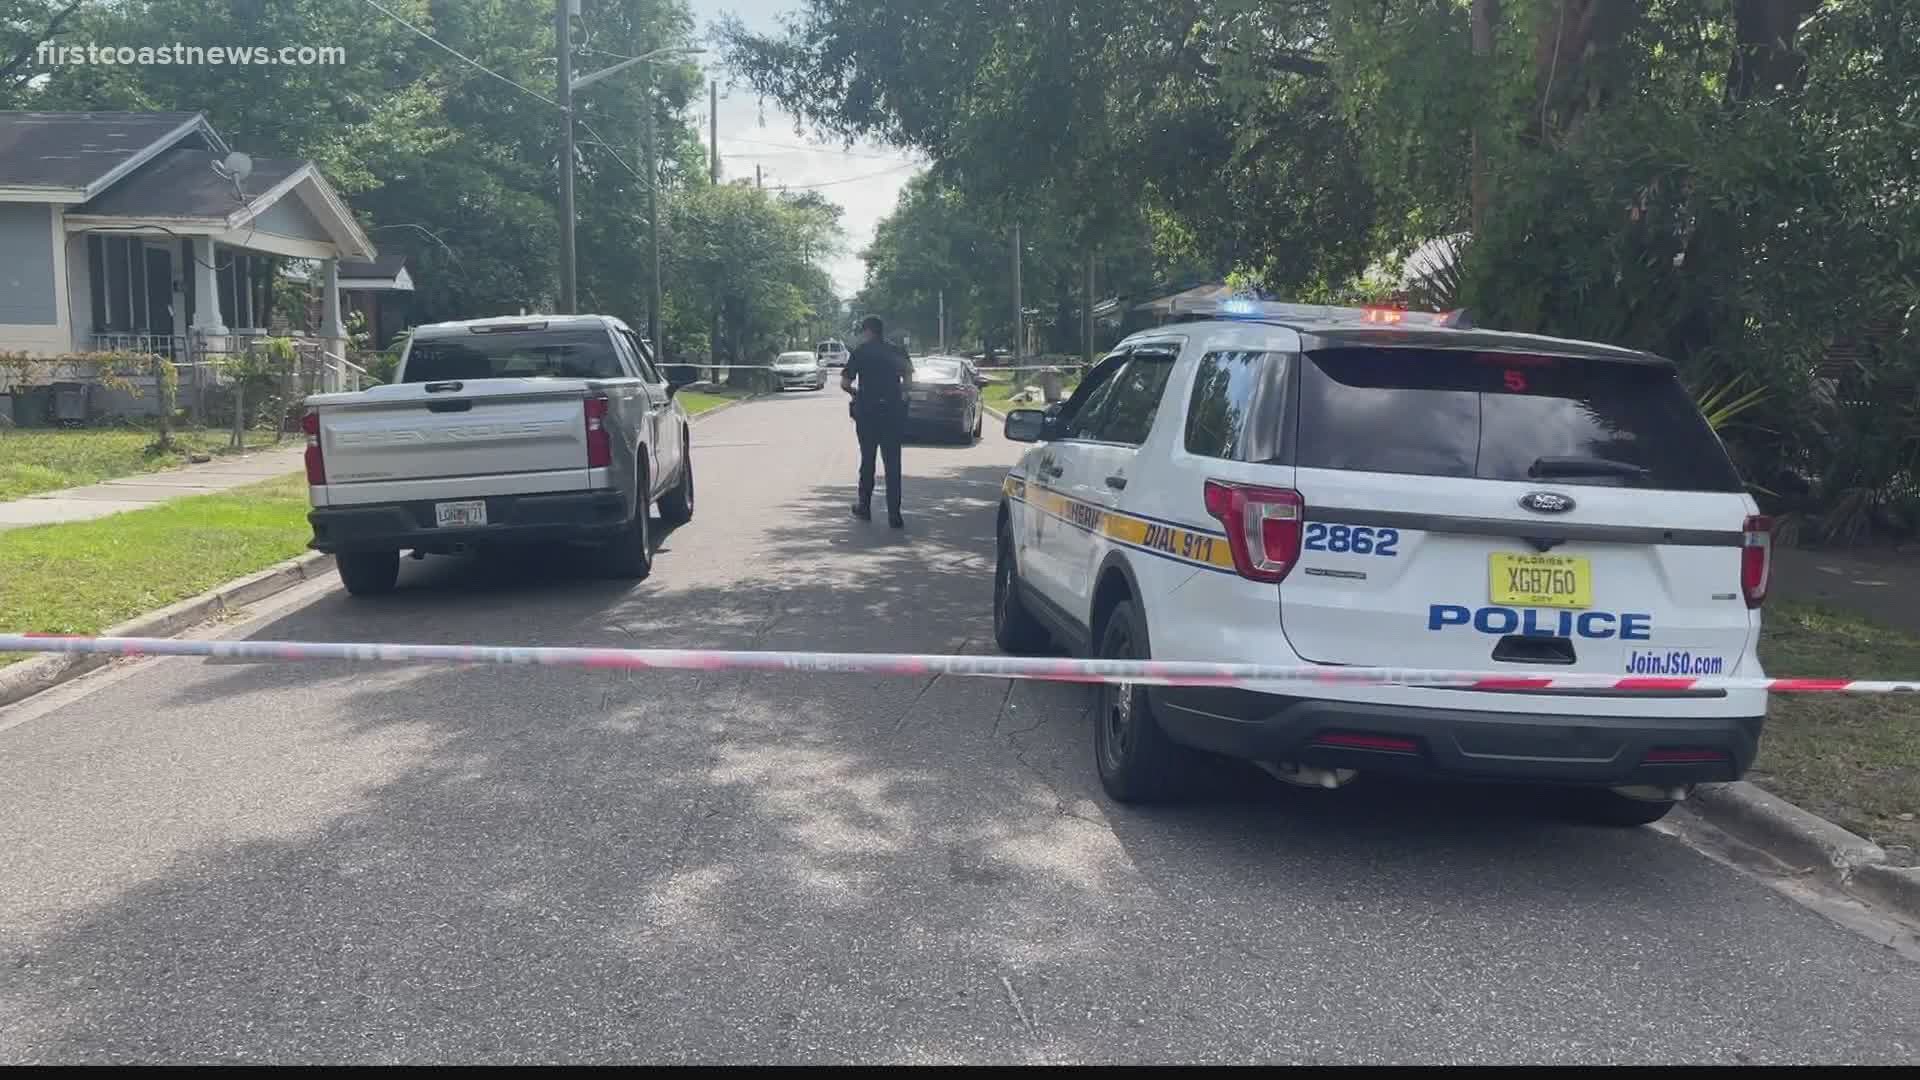 Initially, JSO said the victim's injuries were non-life-threatening, but after being taken to the hospital, he died from his gunshot wounds, JSO said.